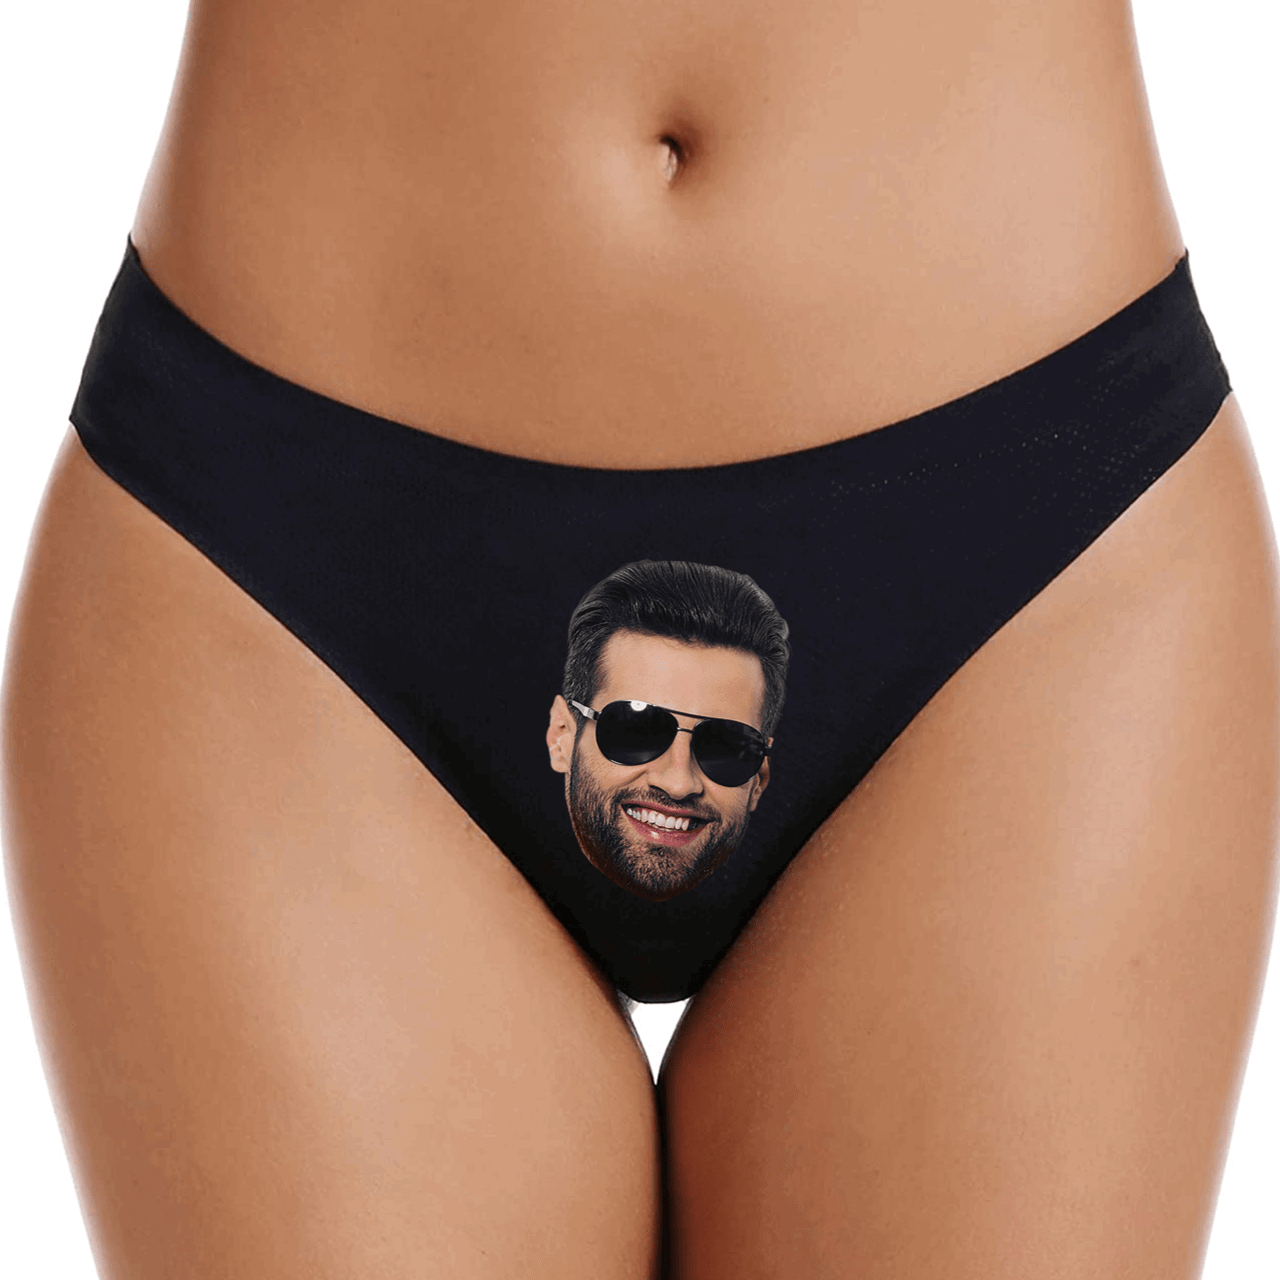 Add a Face Thongs (Black) Add Name or Phrase on the Back